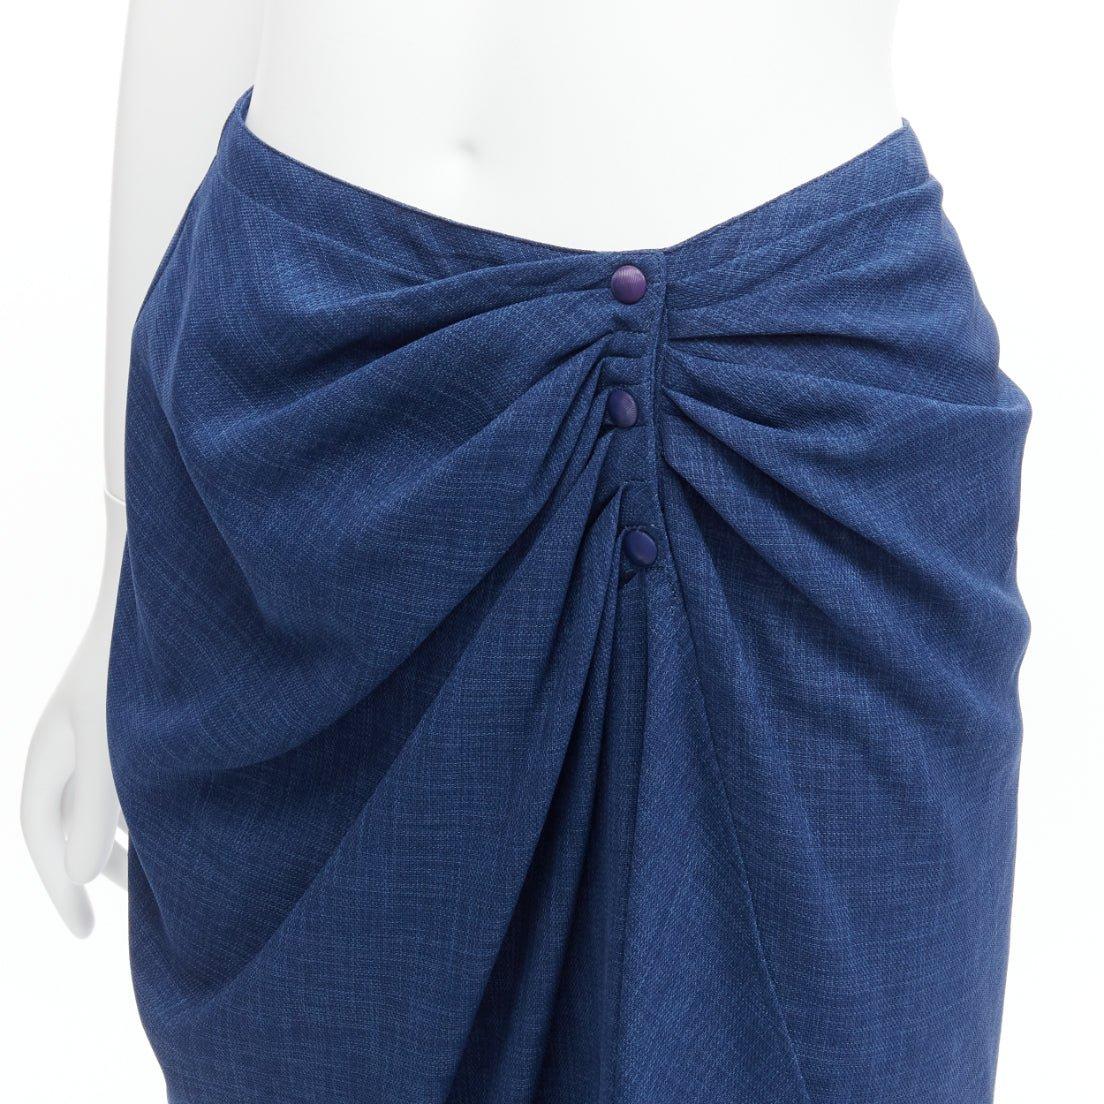 THIERRY MUGLER Vintage blue lightweight drape wrap waist button skirt IT63-90 S
Reference: TGAS/D00444
Brand: Thierry Mugler
Designer: Thierry Mugler
Material: Polyester
Color: Blue
Pattern: Solid
Closure: Snap Buttons
Extra Details: Snap button